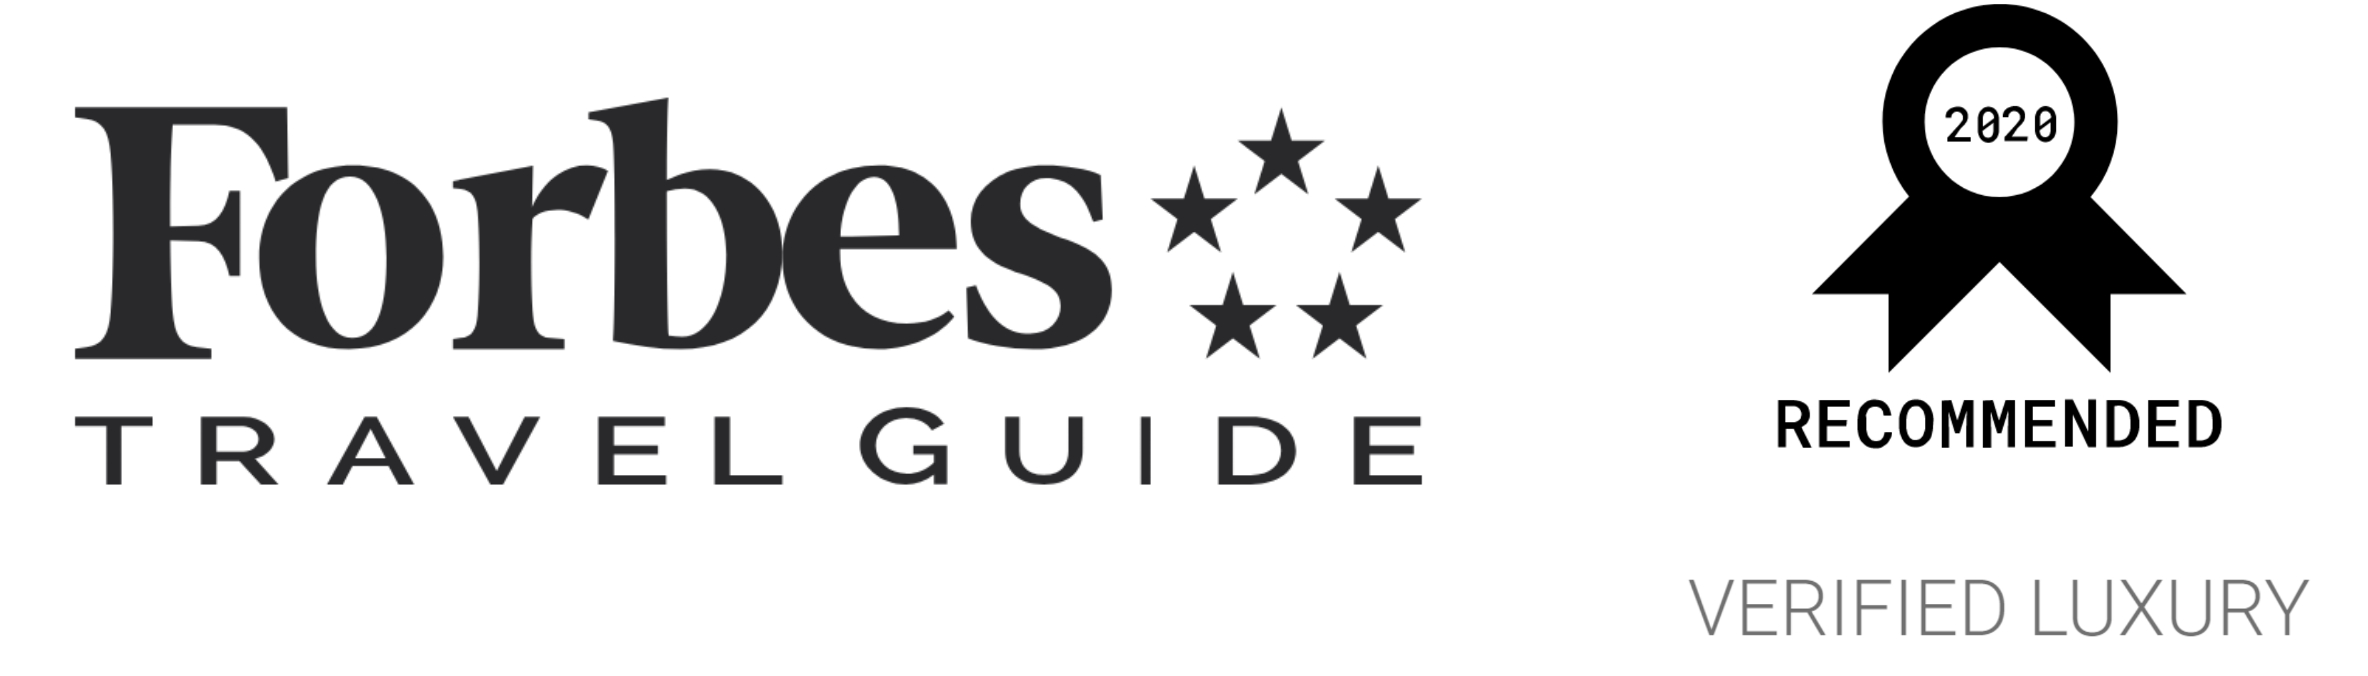 Forbes travel guide